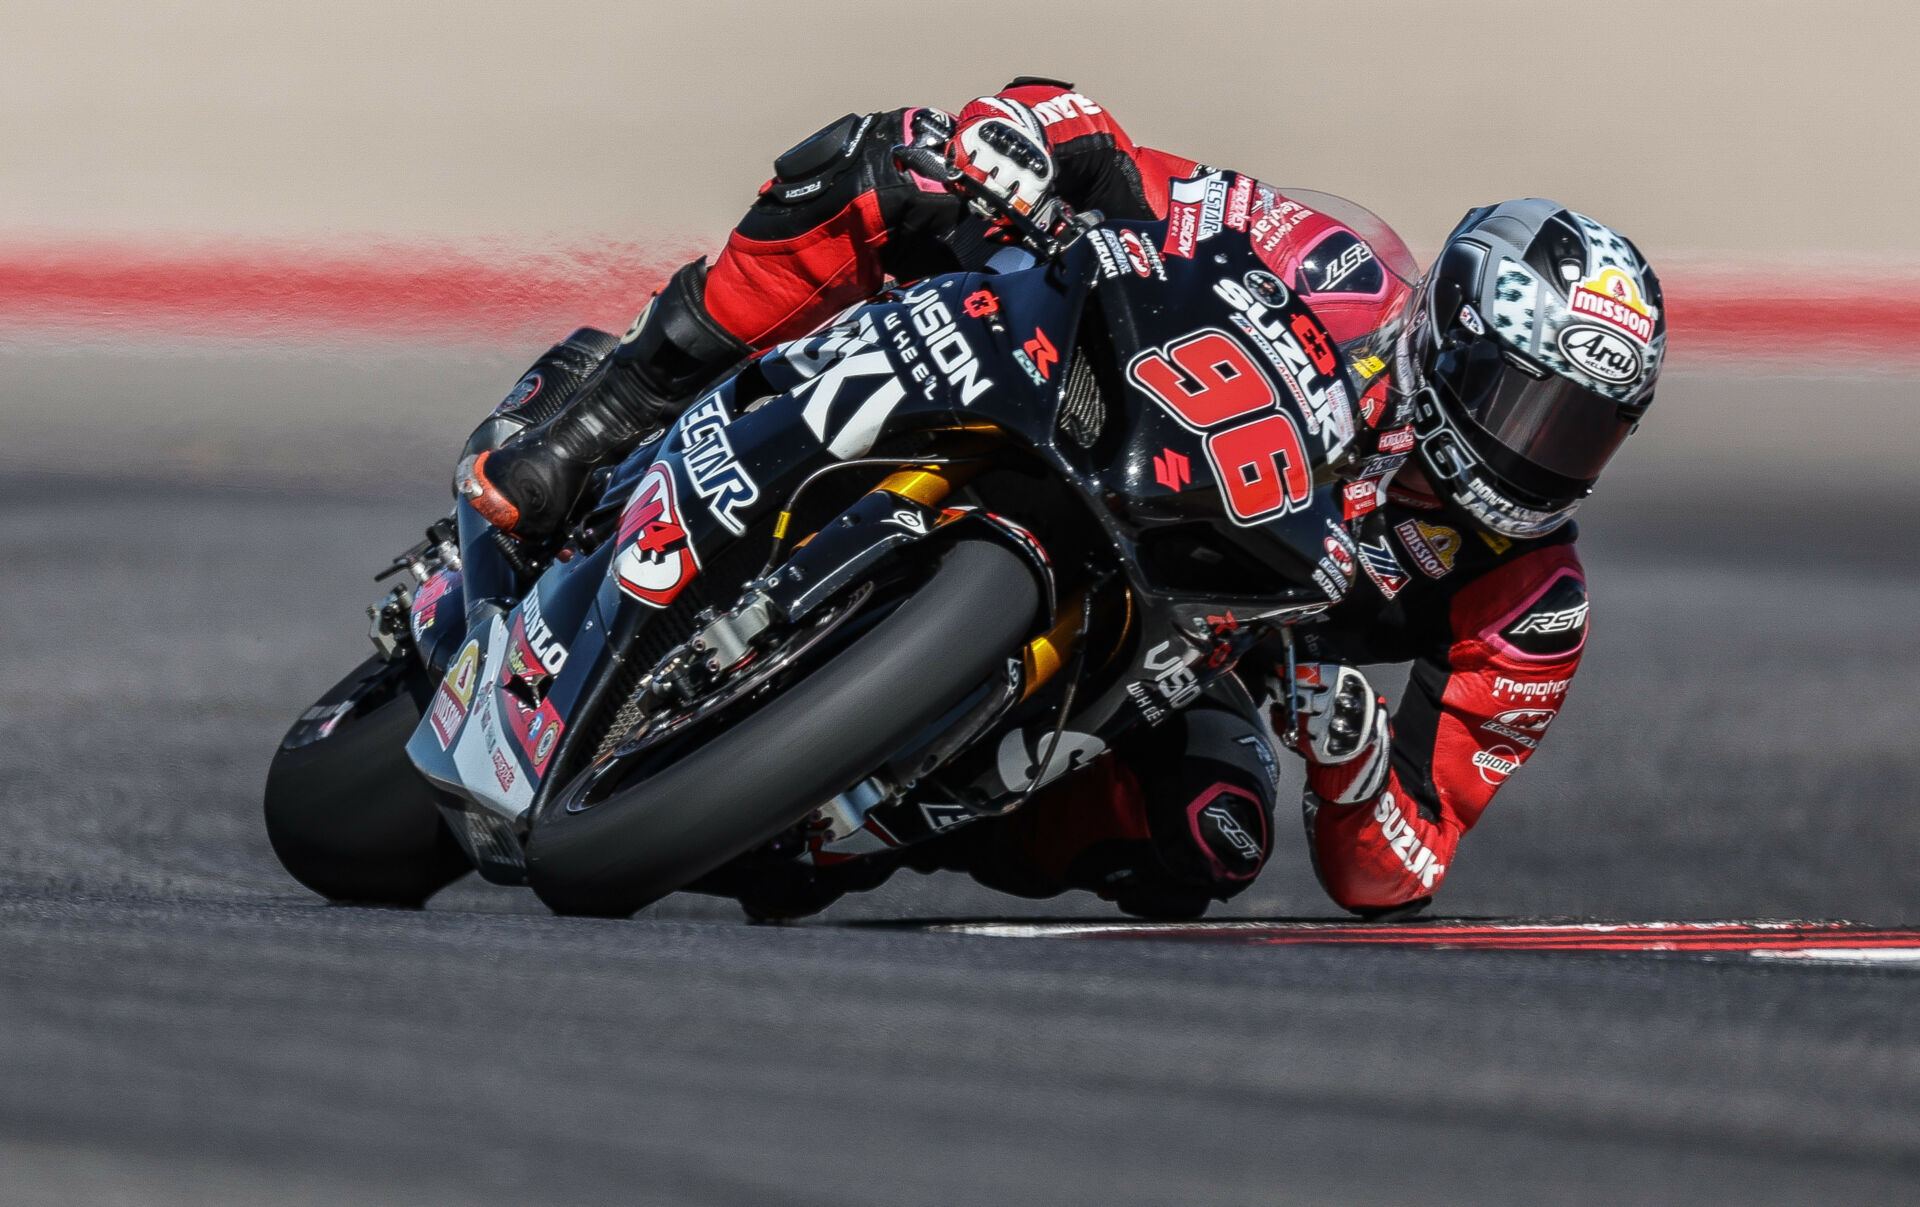 Brandon Paasch (96) at speed at Circuit of The Americas. Photo by Brian J. Nelson.